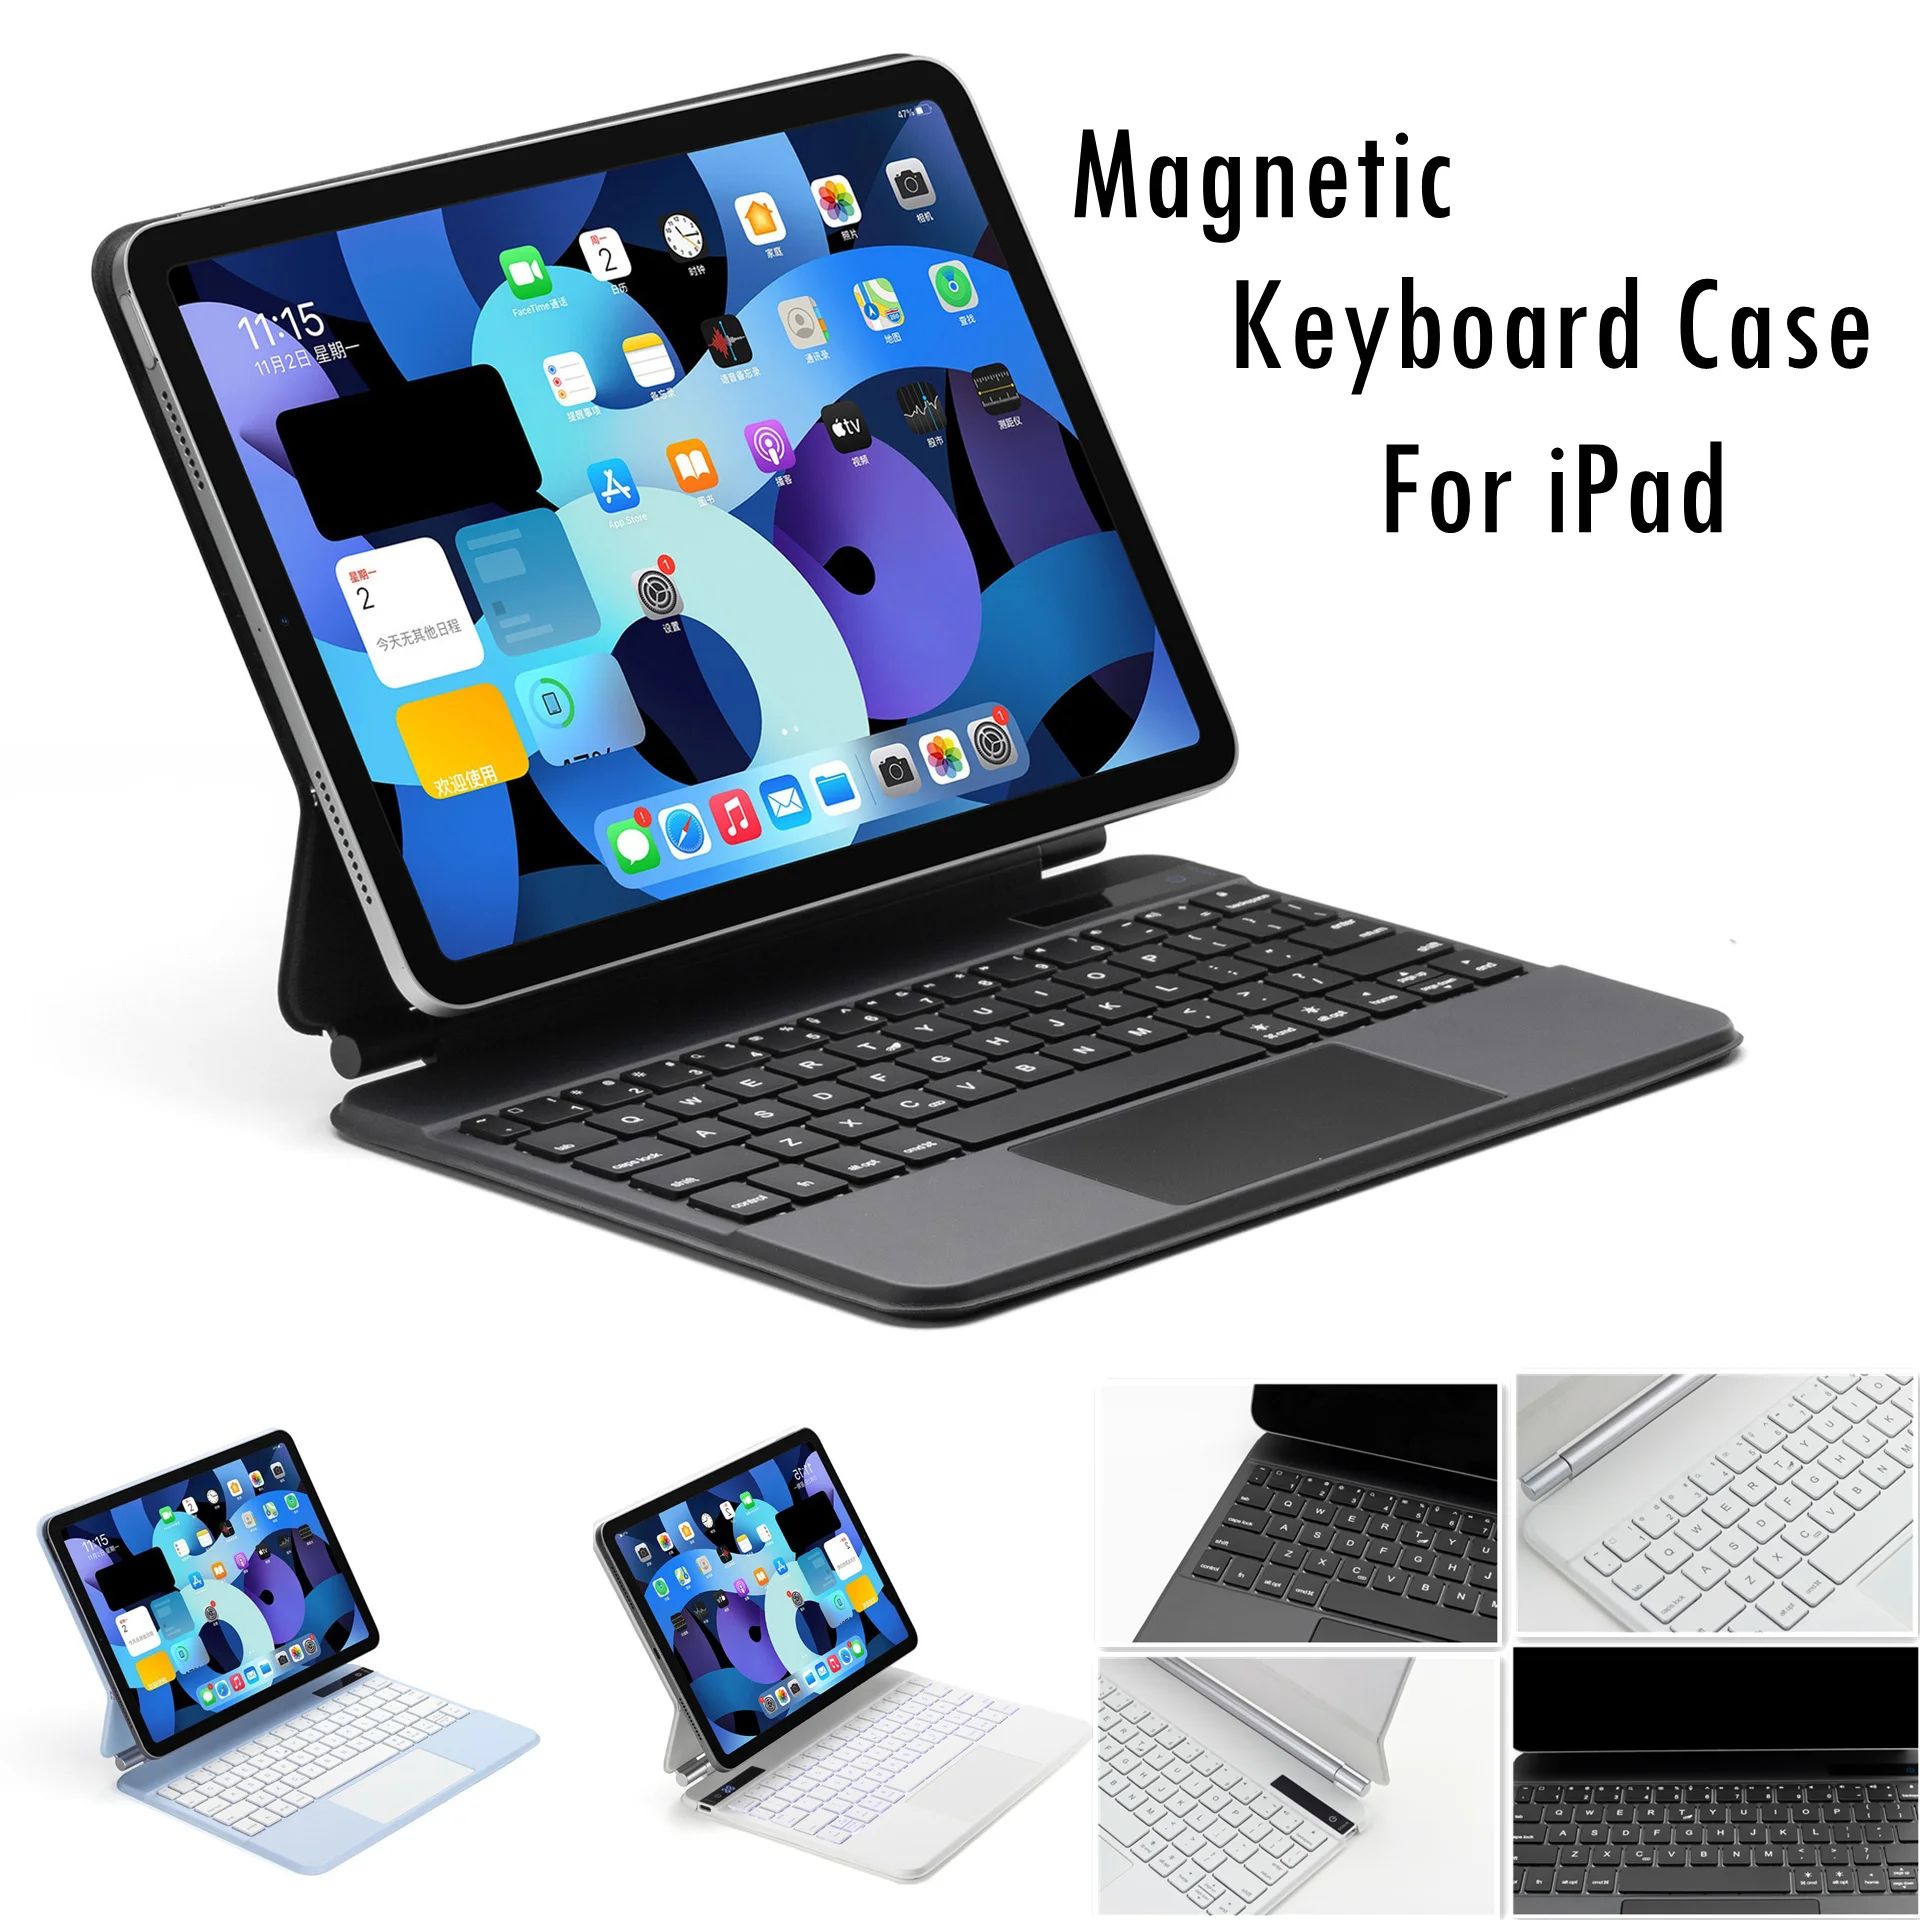 

Magnetic Keyboard Case With Touchpad For IPad Pro11 Pro12.9 Air5 Air4 Magic Control Bluetooth Protective Shell Wireless Keyboard